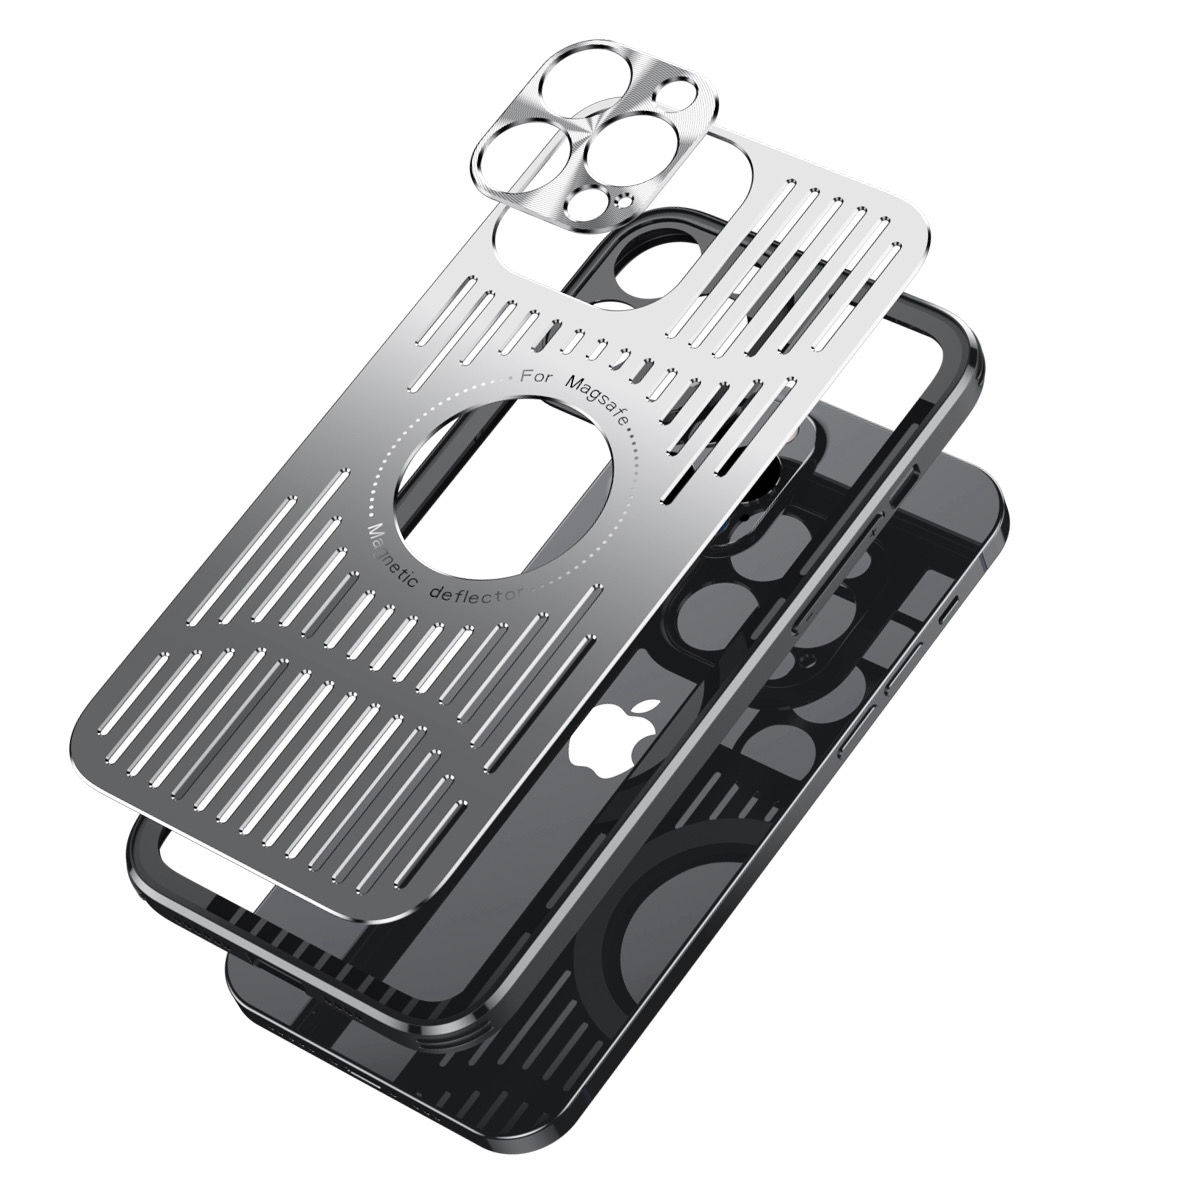 Upgraded Version 2.0 Magnetic Charging and Cooling Technology Case for iPhone